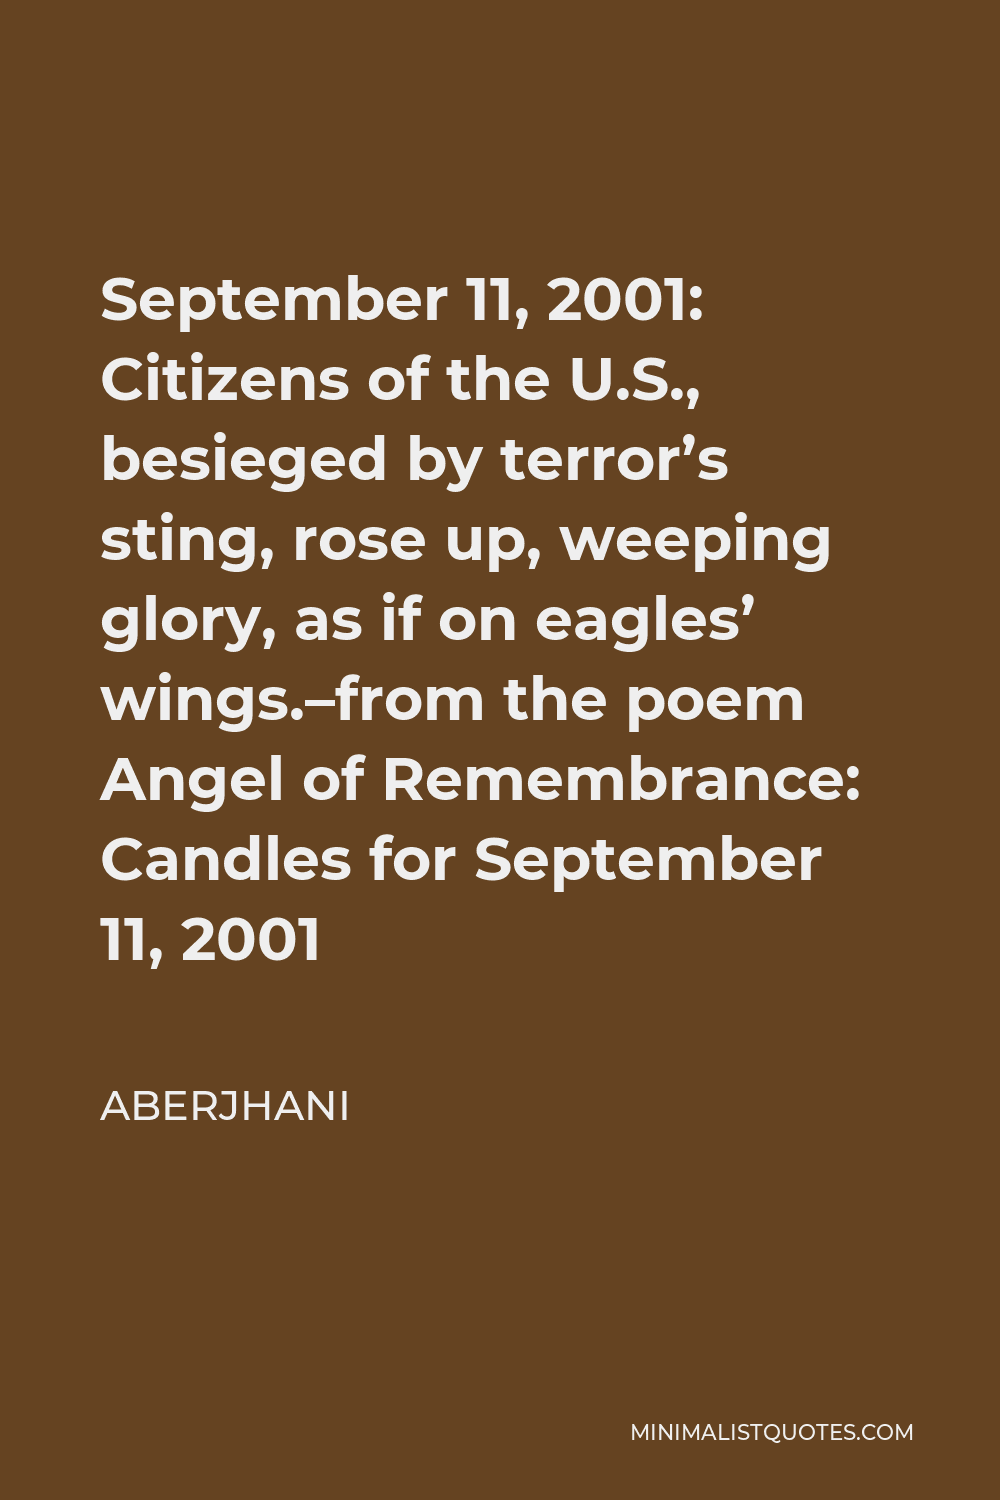 Aberjhani Quote - September 11, 2001: Citizens of the U.S., besieged by terror’s sting, rose up, weeping glory, as if on eagles’ wings.–from the poem Angel of Remembrance: Candles for September 11, 2001